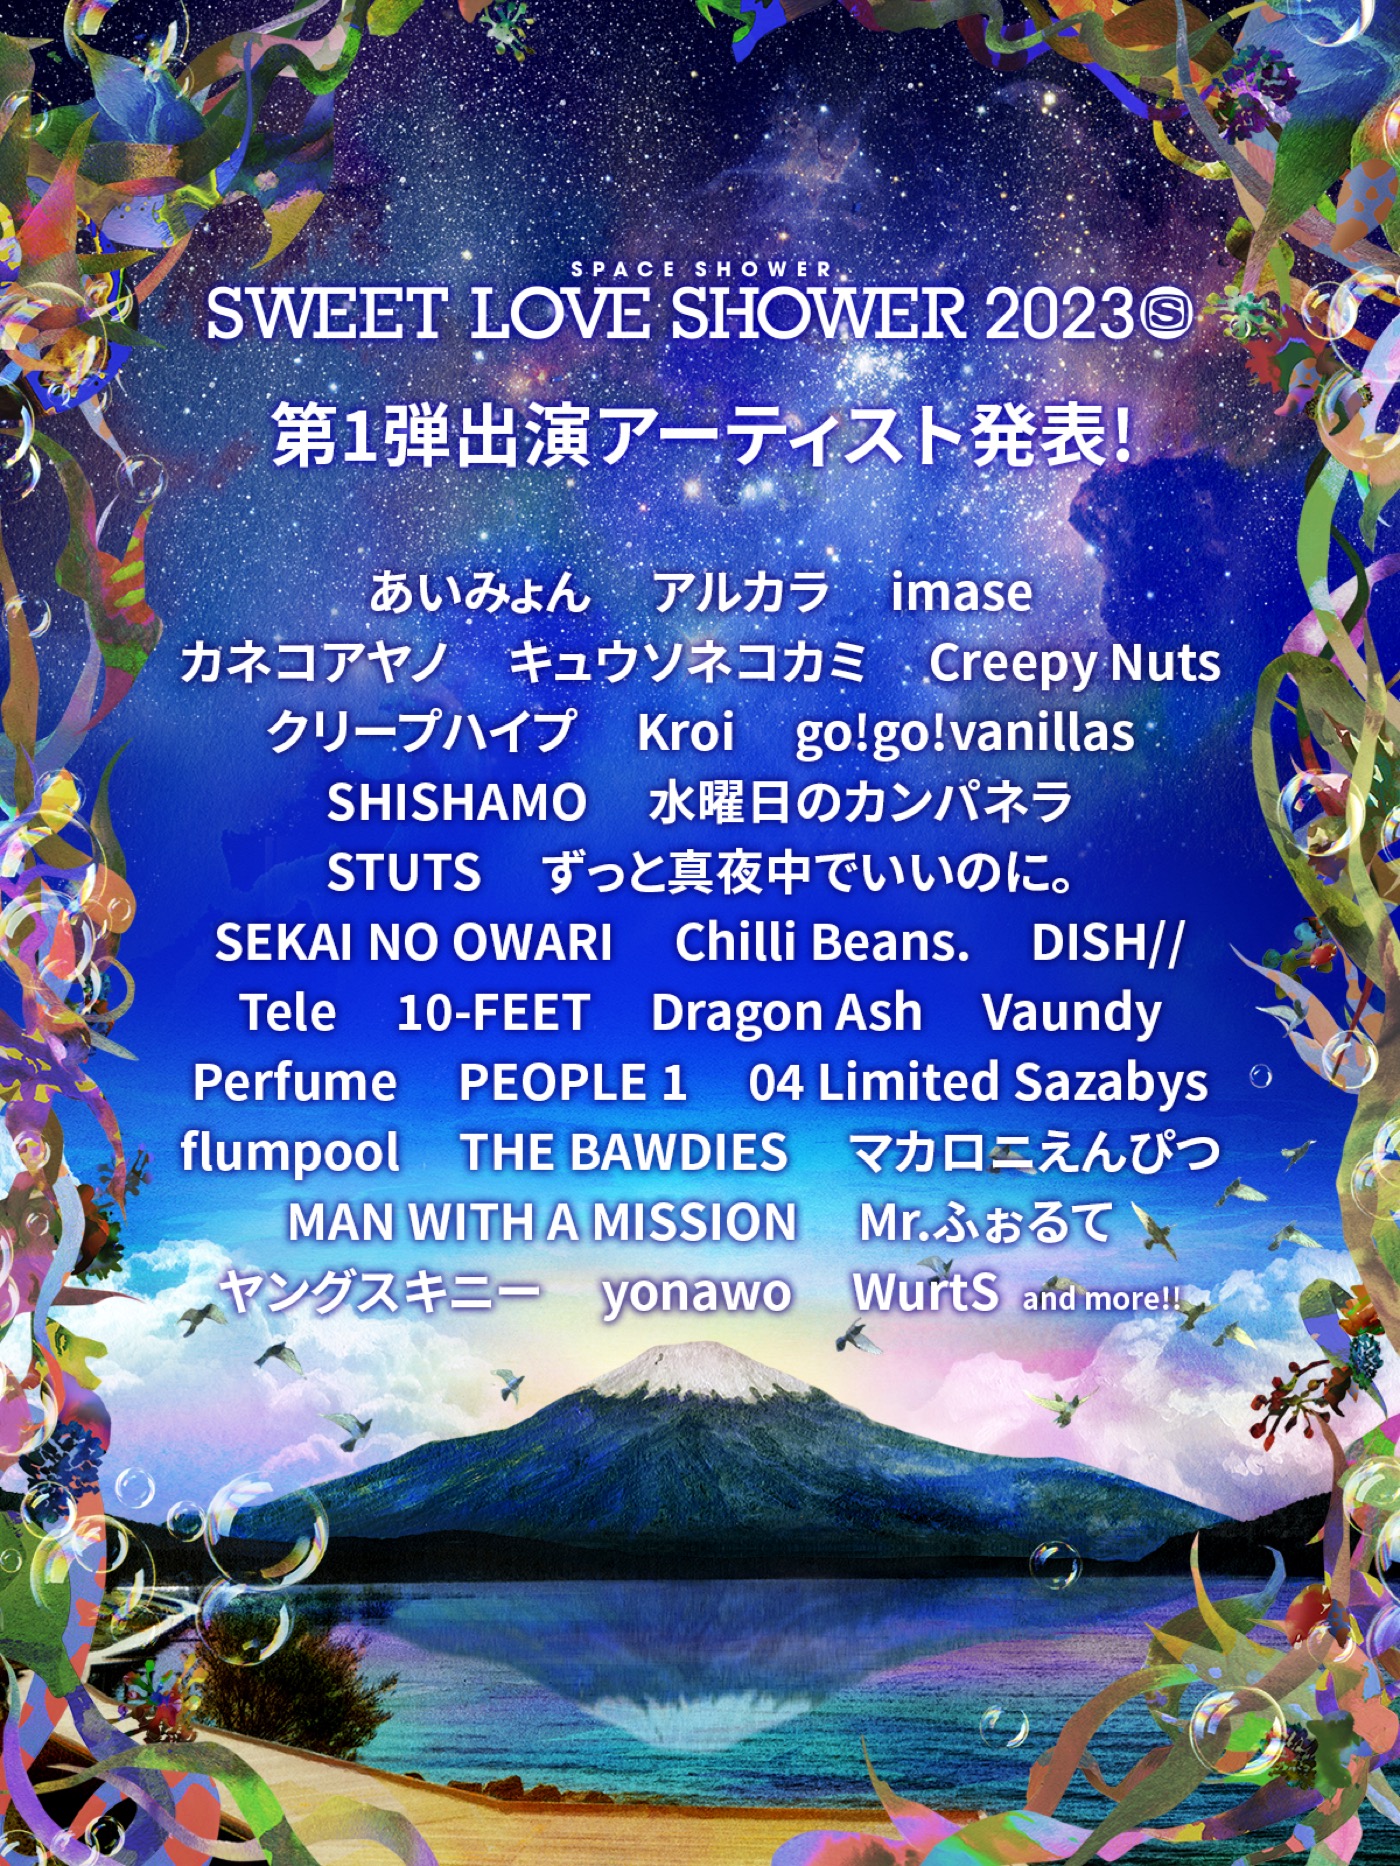 『SWEET LOVE SHOWER 2023』第1弾出演アーティスト発表！ 多彩な31組の出演が決定 - 画像一覧（3/3）